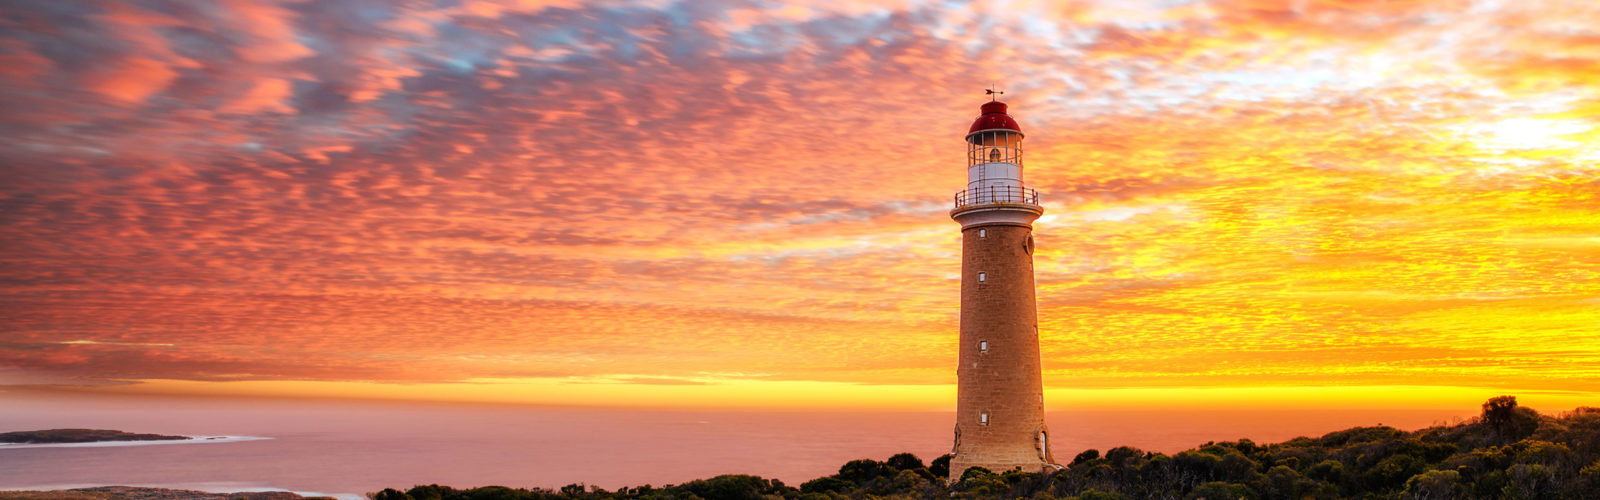 The lighthouse at Cape Du Couedic on Kangaroo Island, with the sun setting in the background